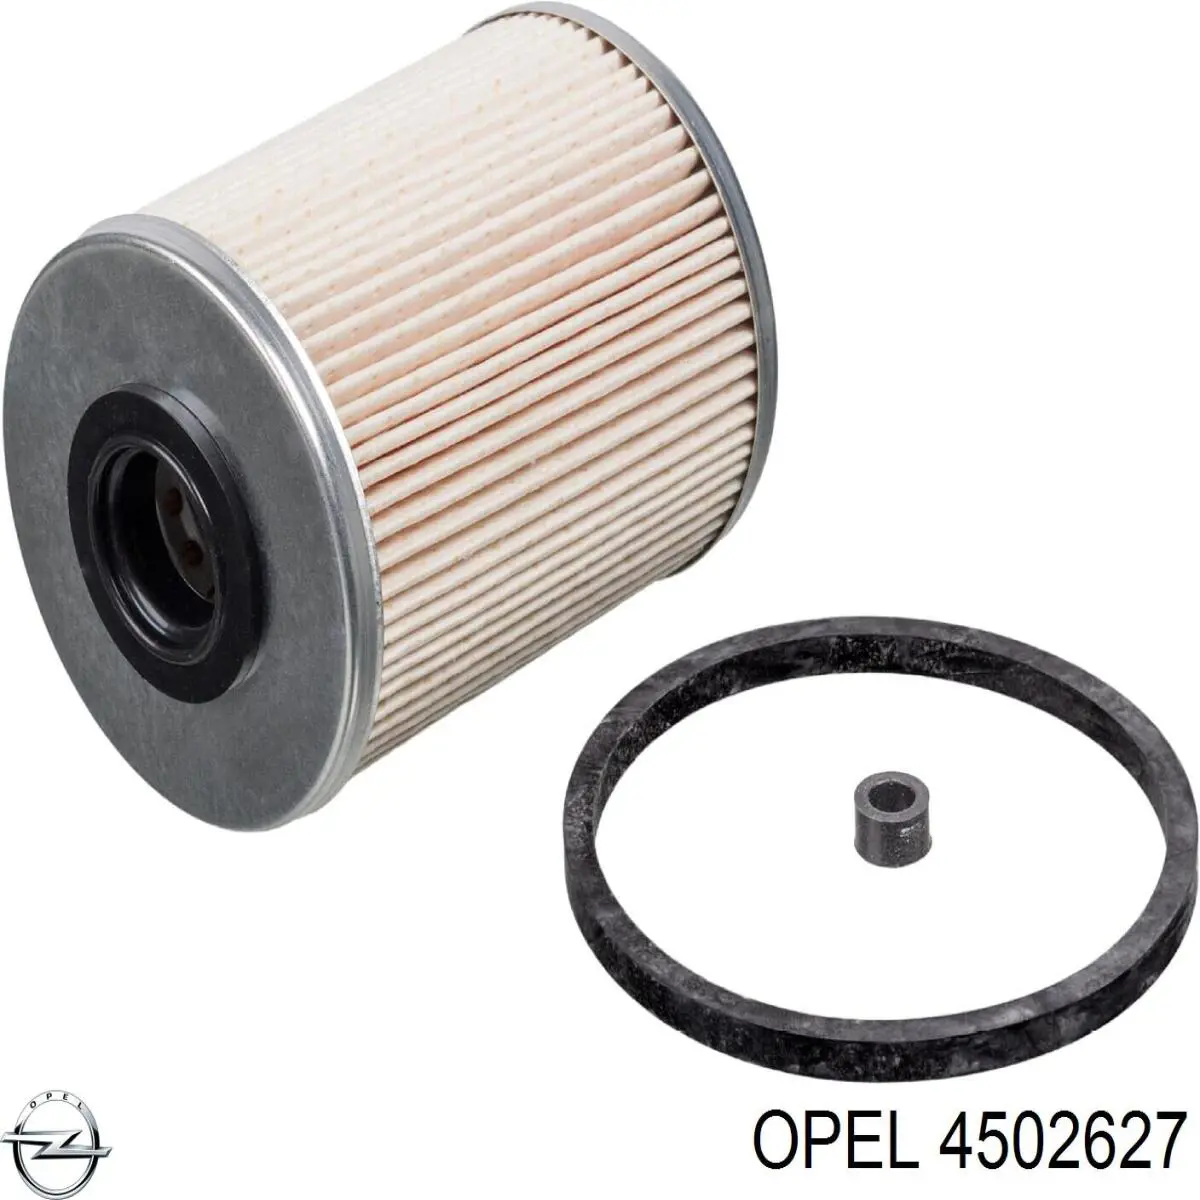 4502627 Opel filtro combustible